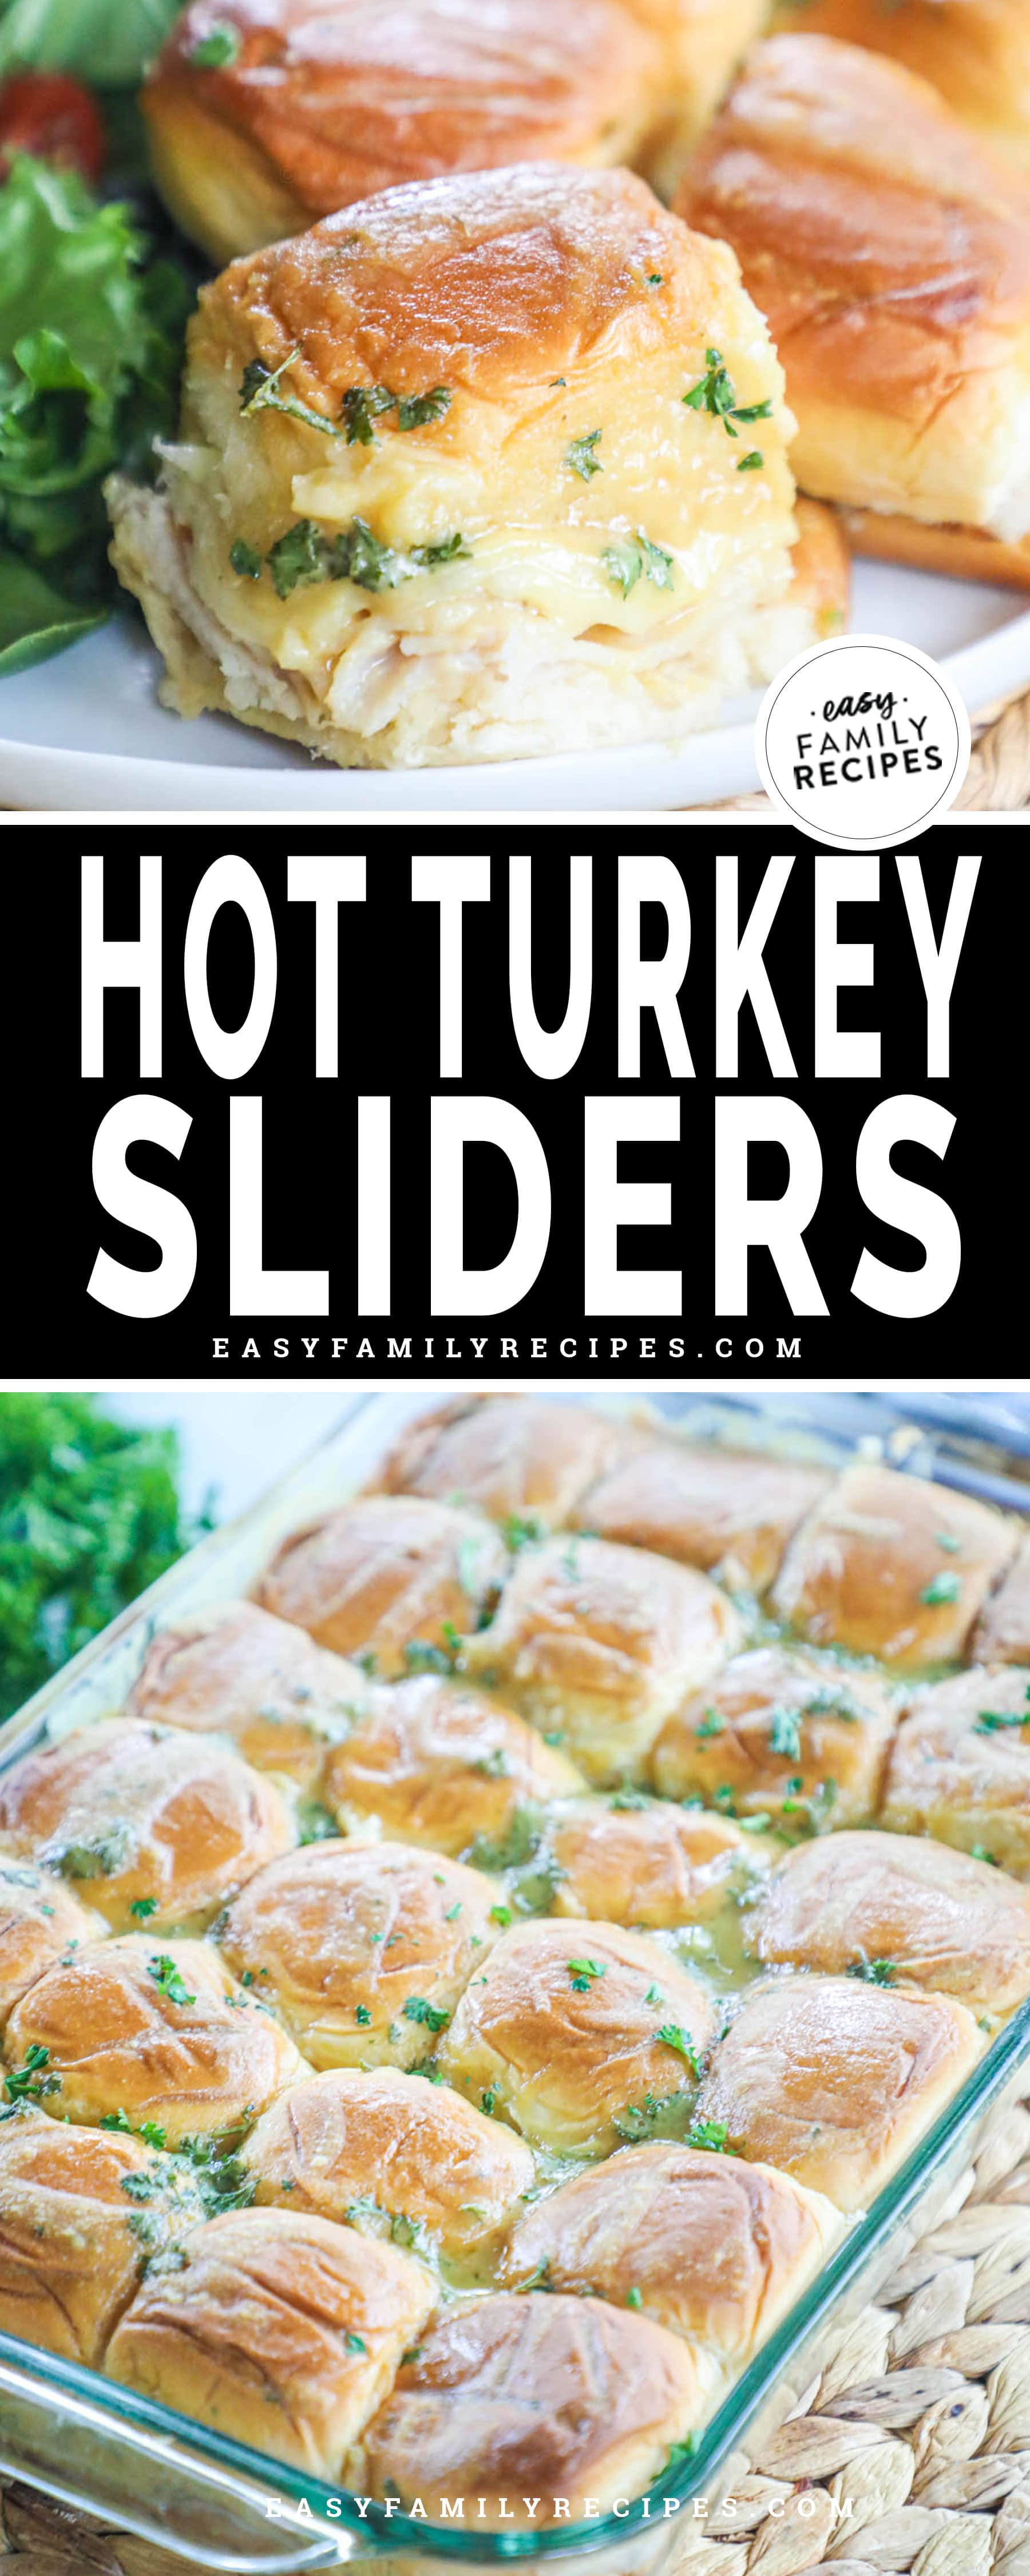 Collage image with a close up of turkey and cheese sliders on the top and a pan of sliders on the bottom.